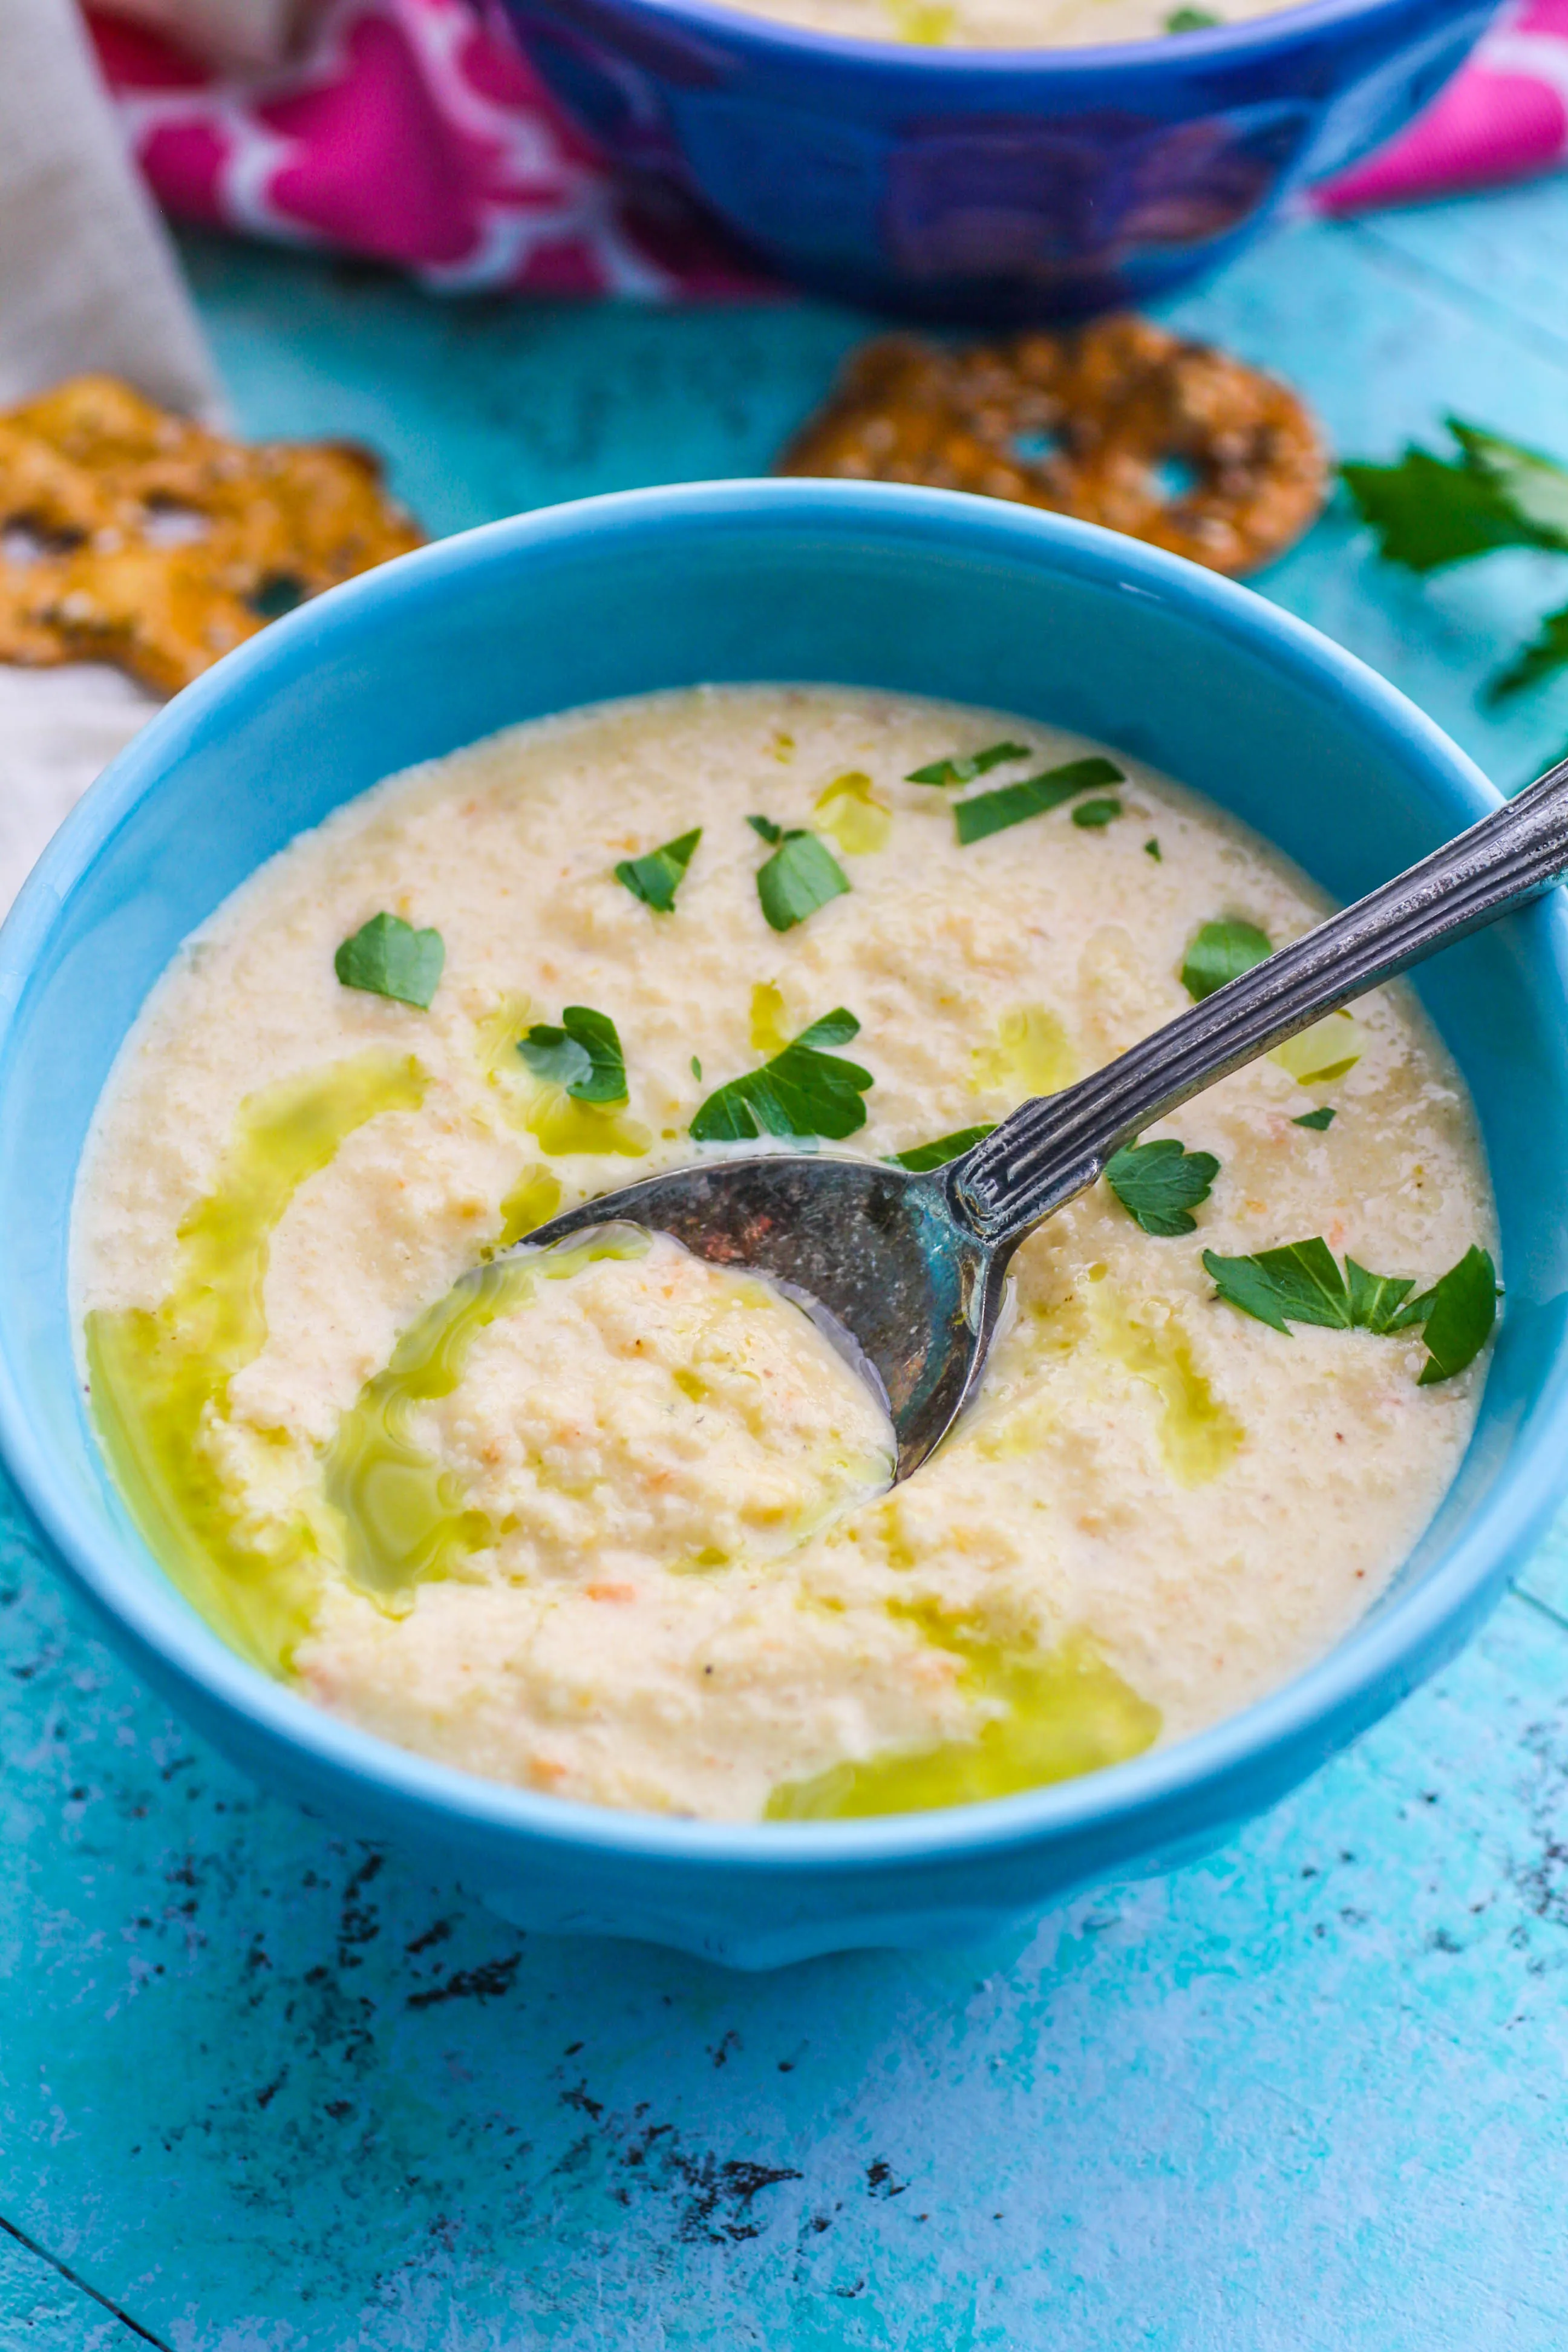 Grab a spoon to dig into this Creamy Roasted Cauliflower Soup with Parsley Oil. You'll love how satisfying Creamy Roasted Cauliflower Soup with Parsley Oil is!